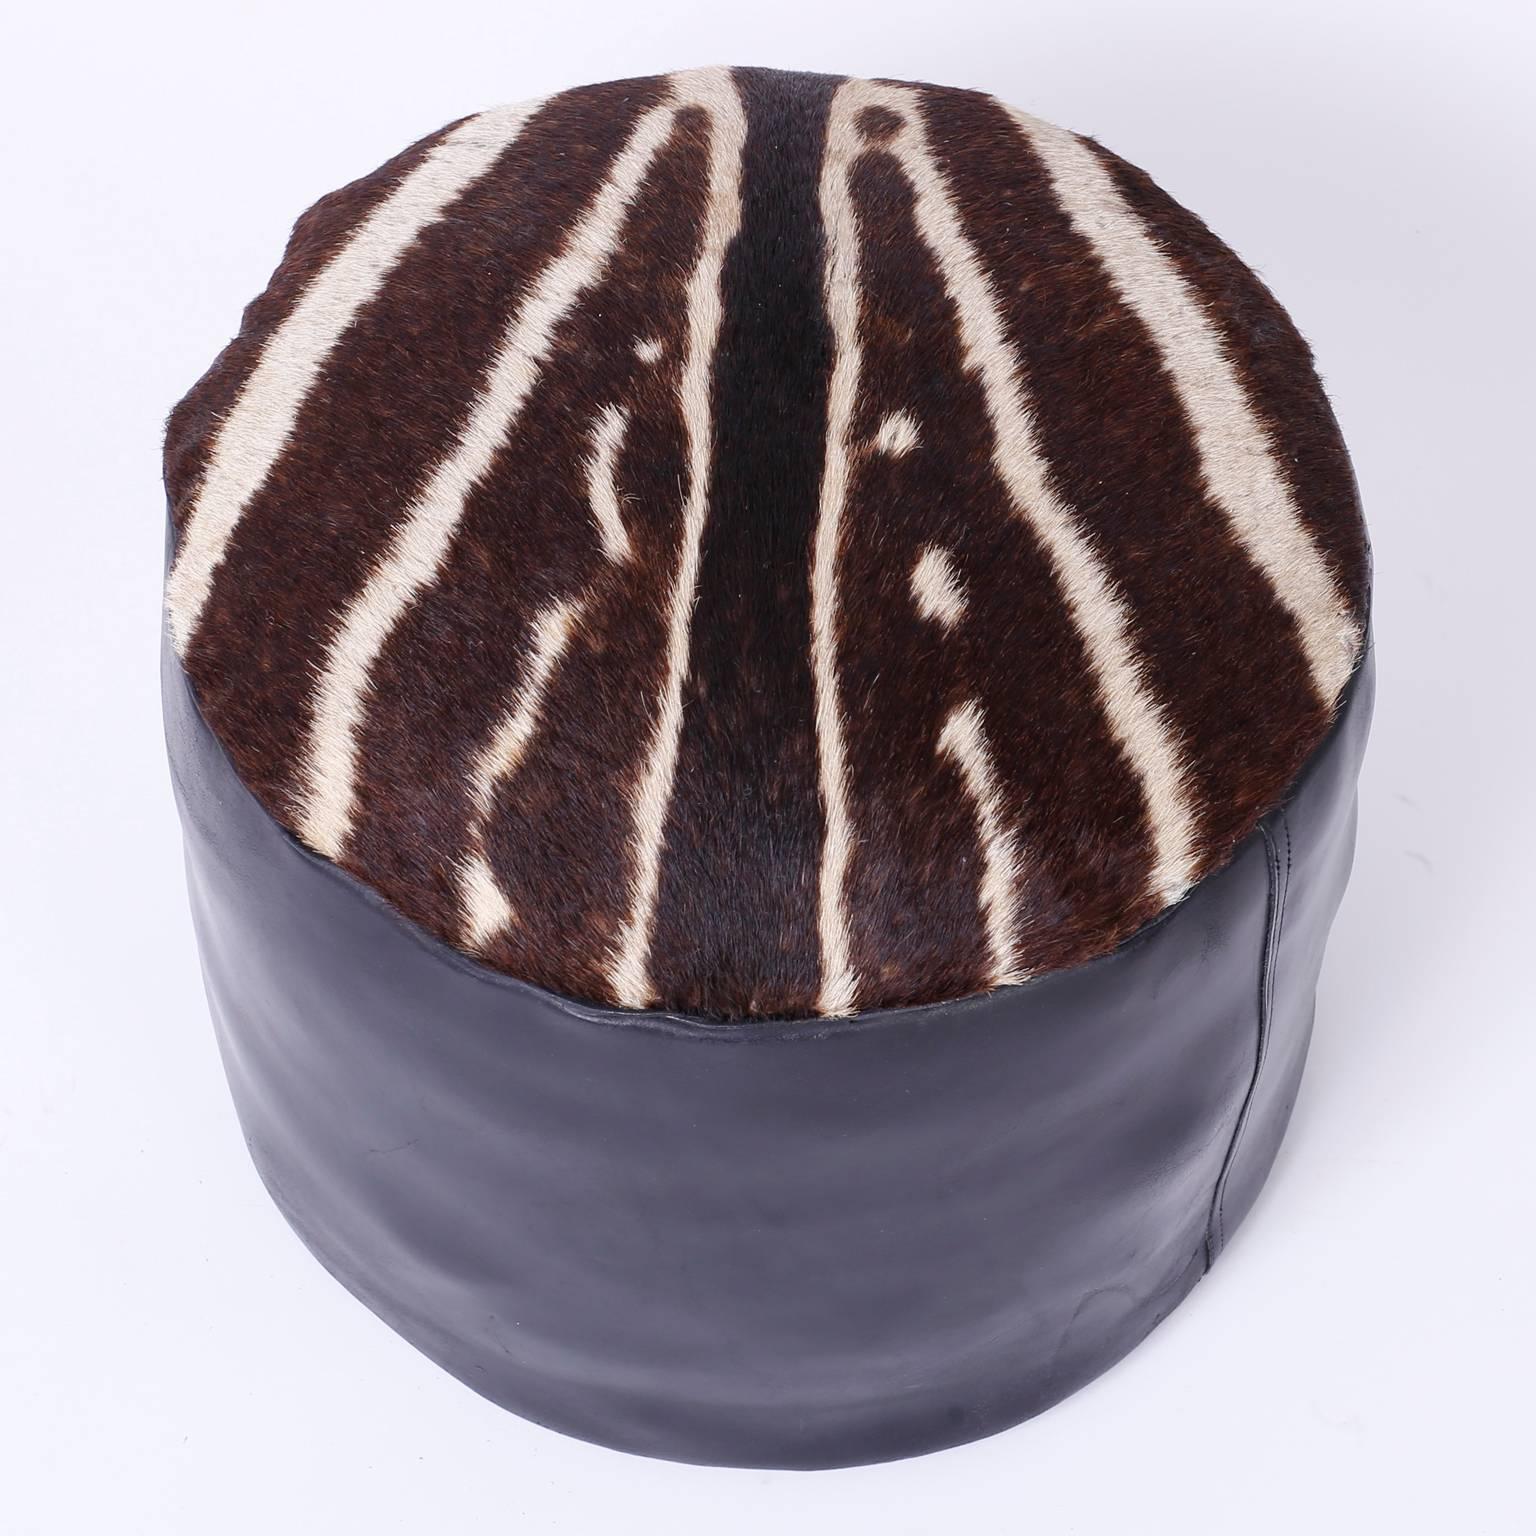 In vogue, round foot stool or hassock with black leather sides and a well placed zebra hide top. Simple form, iconic design.